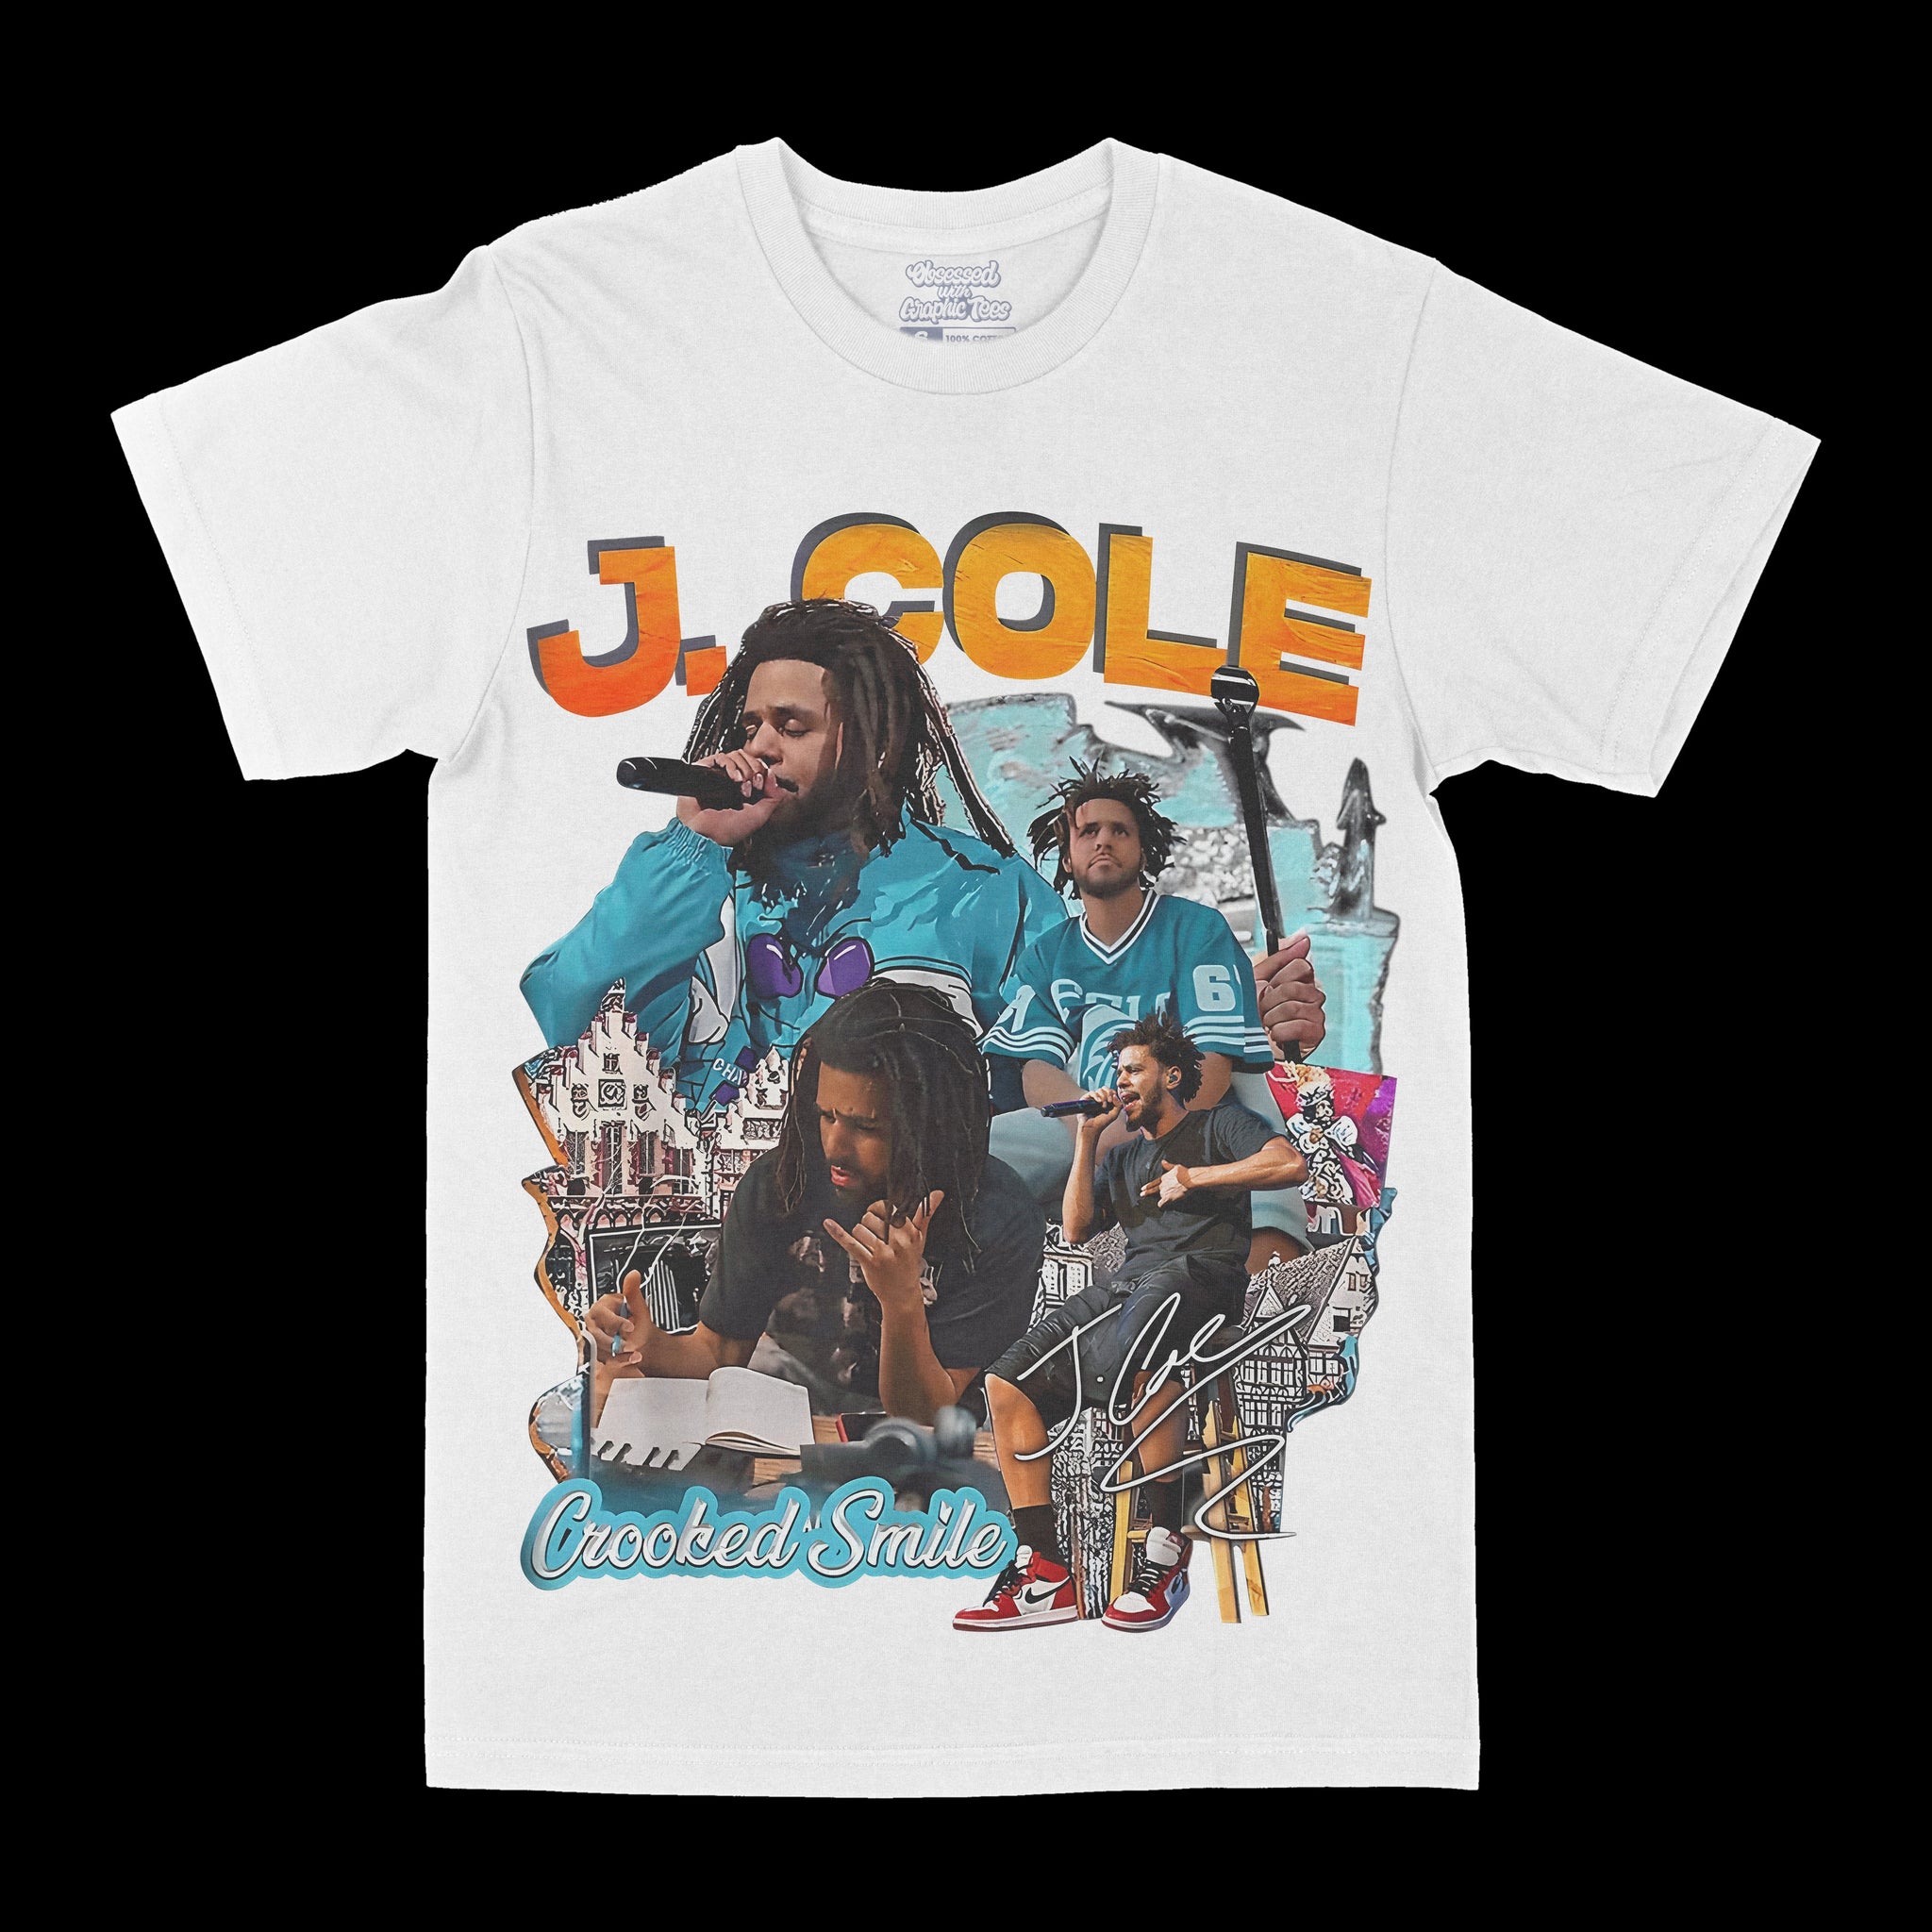 J. Cole "Crooked Smile" Graphic Tee